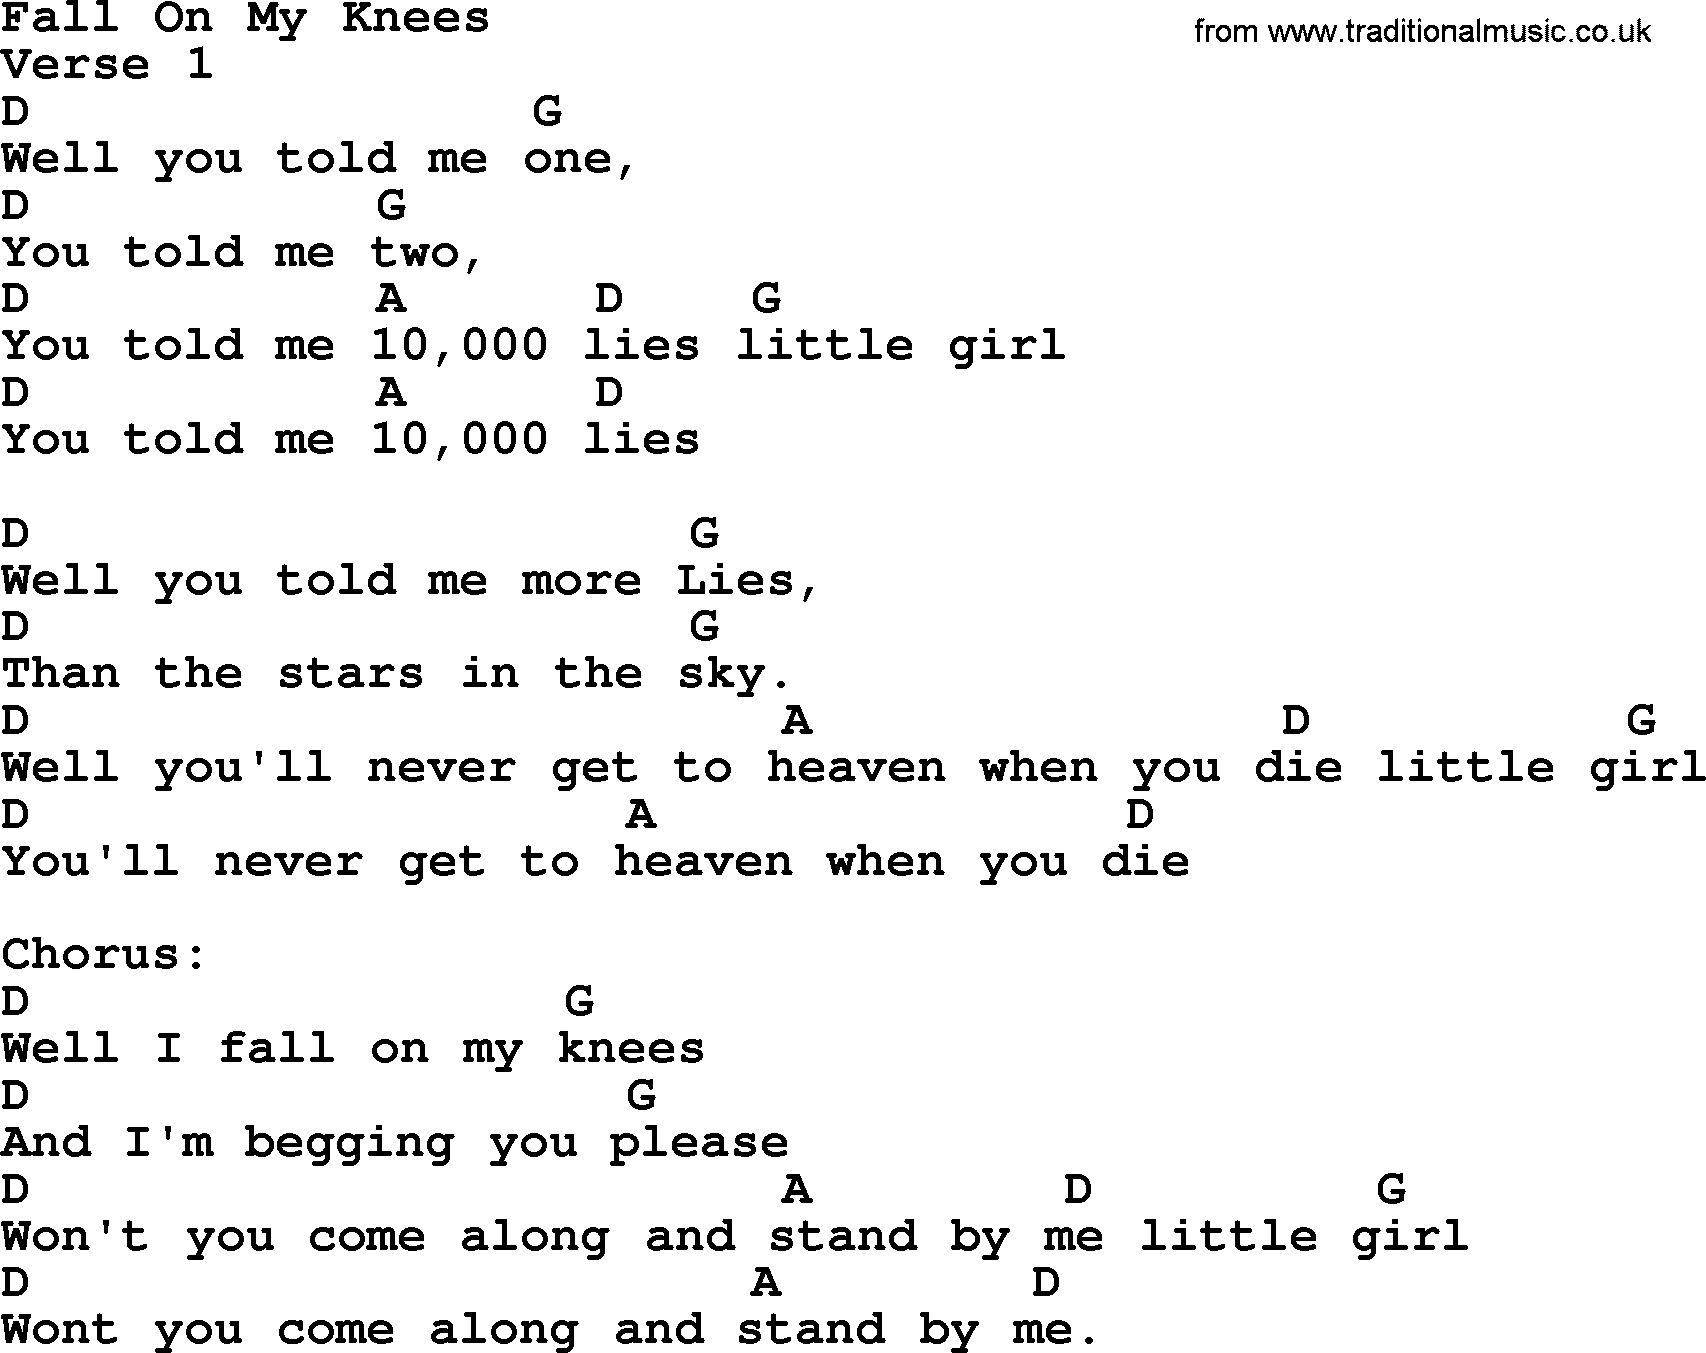 Bluegrass song: Fall On My Knees, lyrics and chords